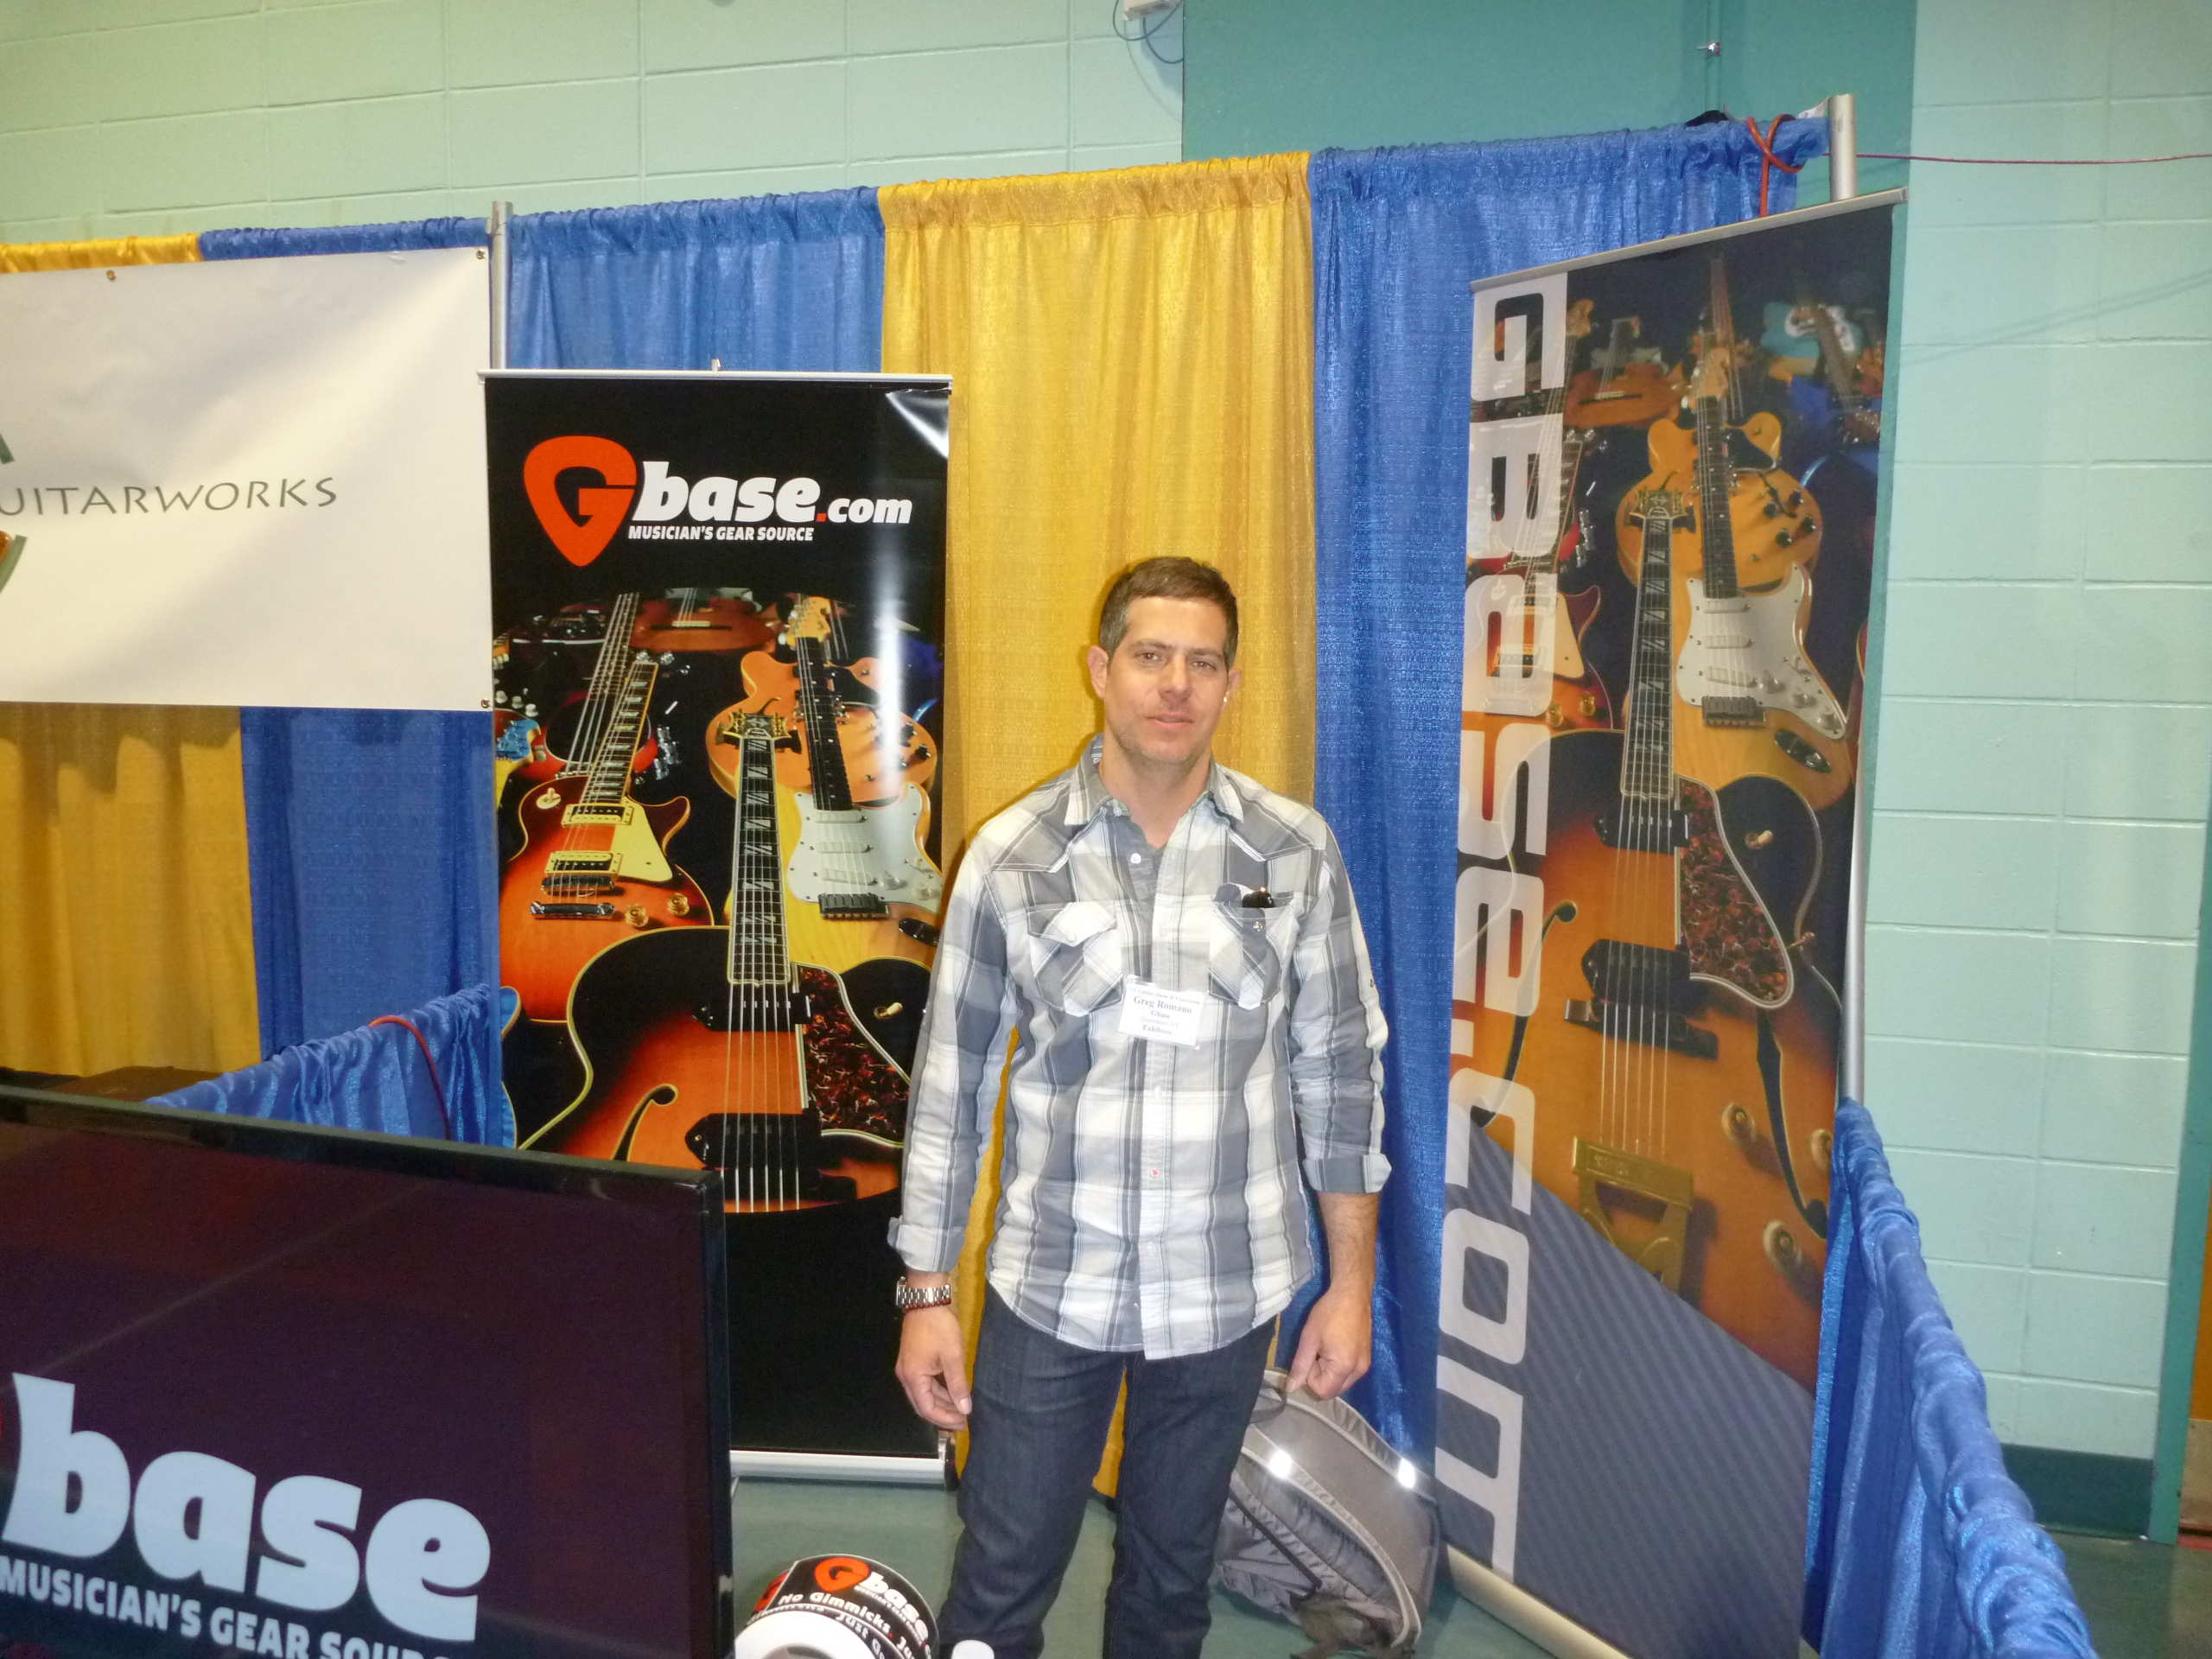 Greg Romano of Gbase, our annual sponsor of the NY Guitar Show.